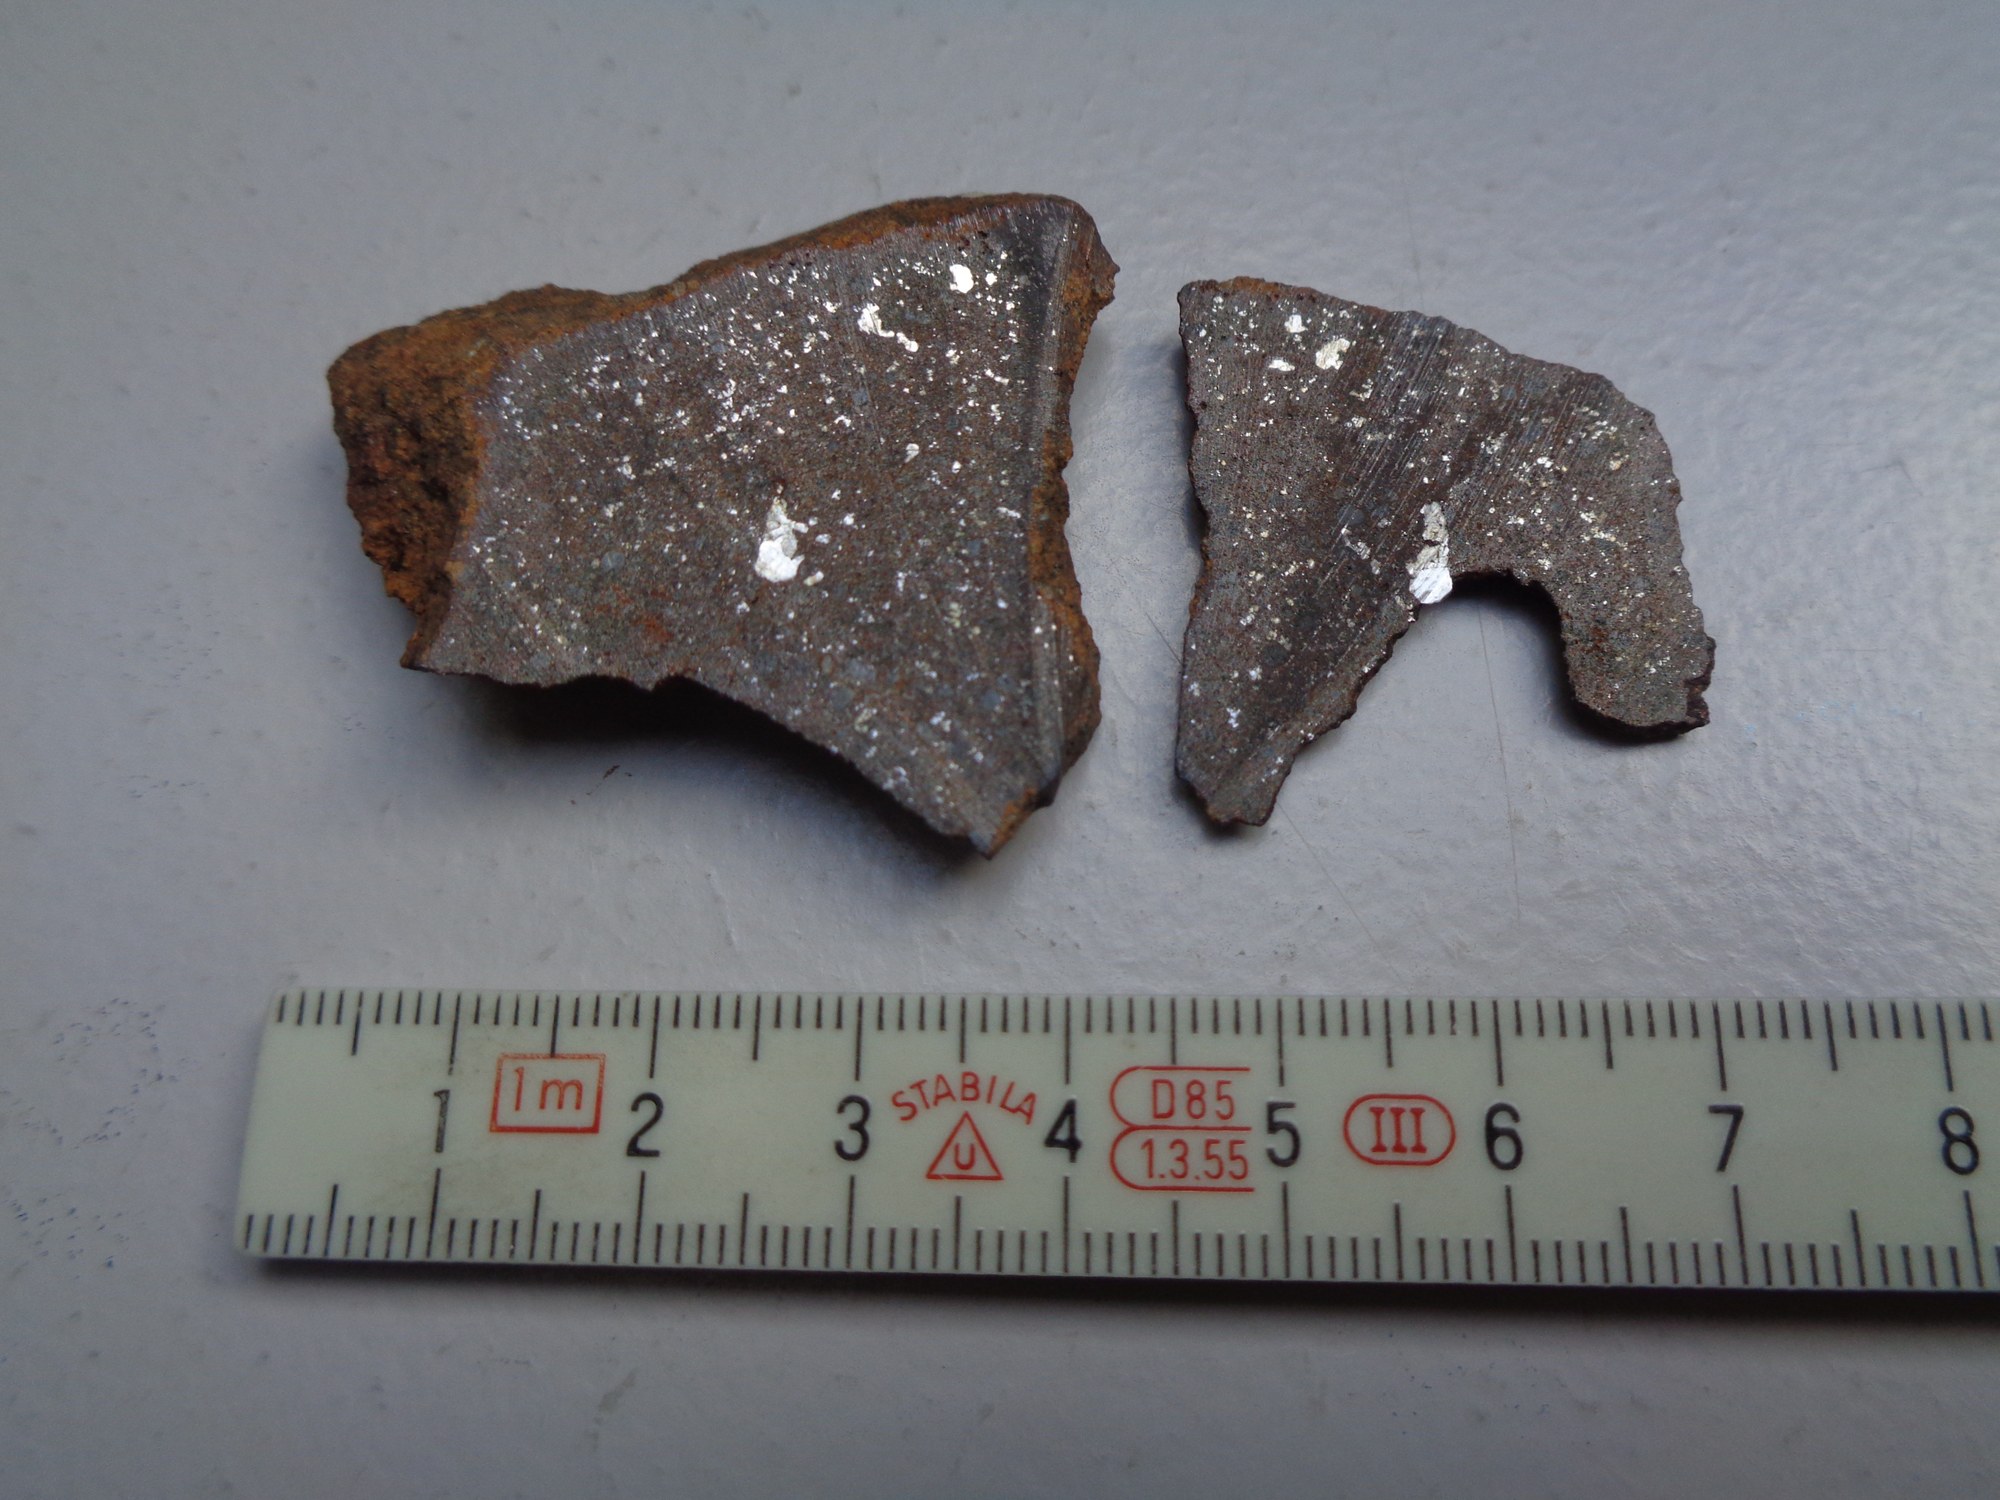 The first clear indication that ‘Blaubeuren’ is a meteorite